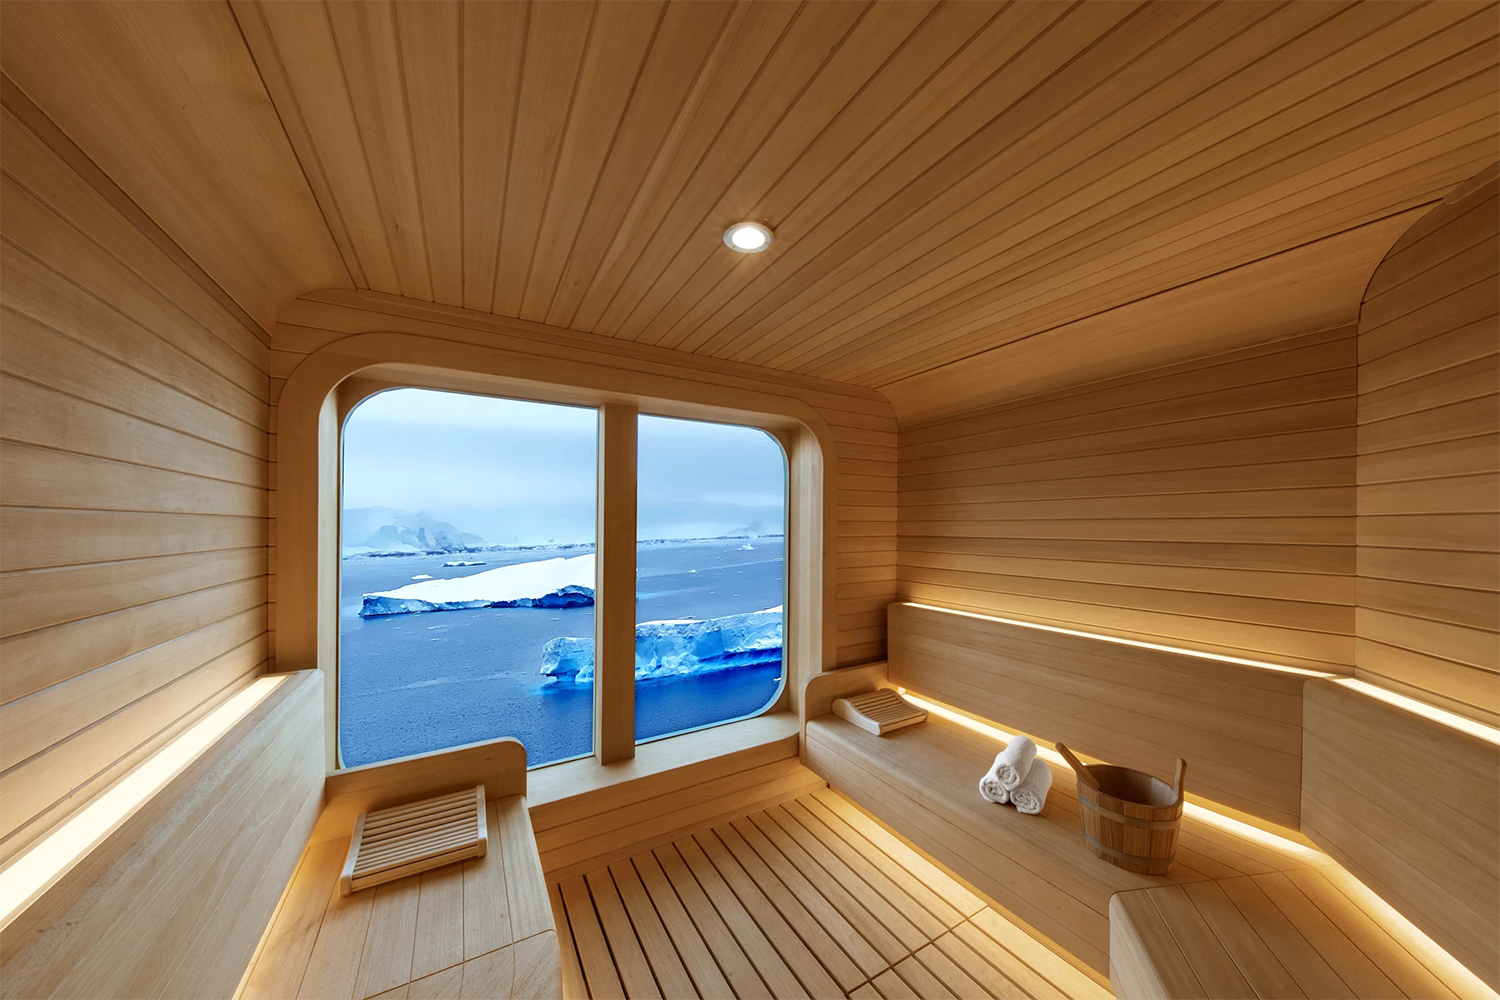 The ocean view from the sauna of the new cruise ship, the Seabourn Venture